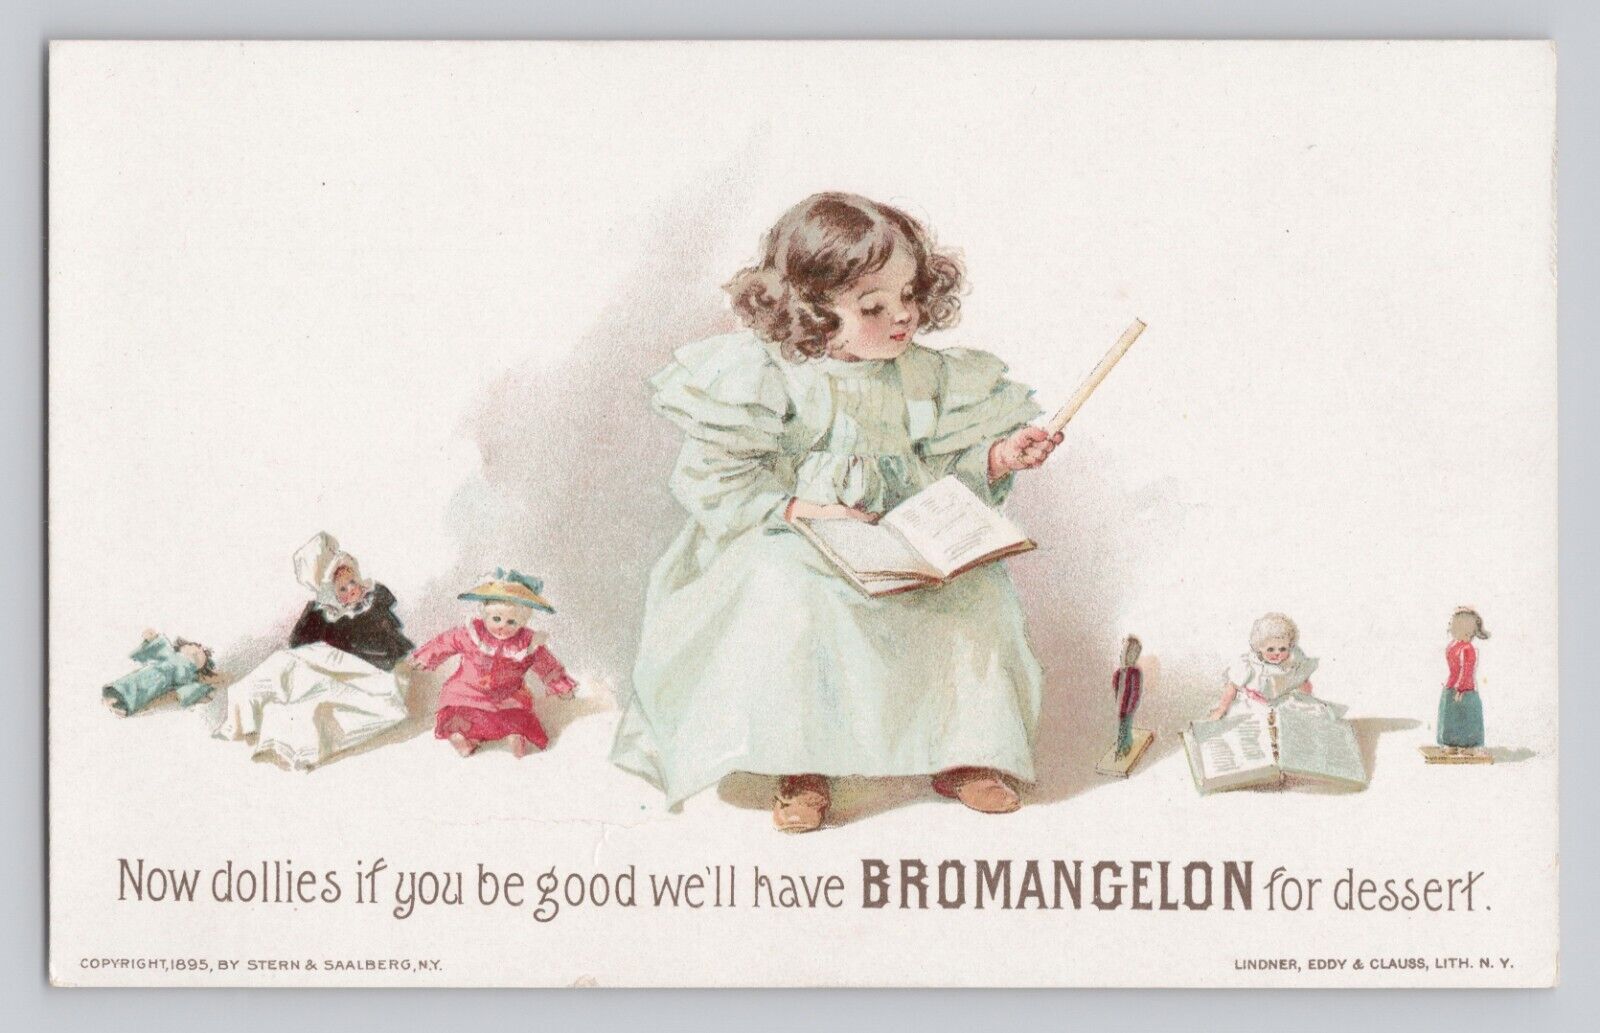 Girl with Dolls Dollies Bromangelon Jelly for Desert Victorian Trade Card